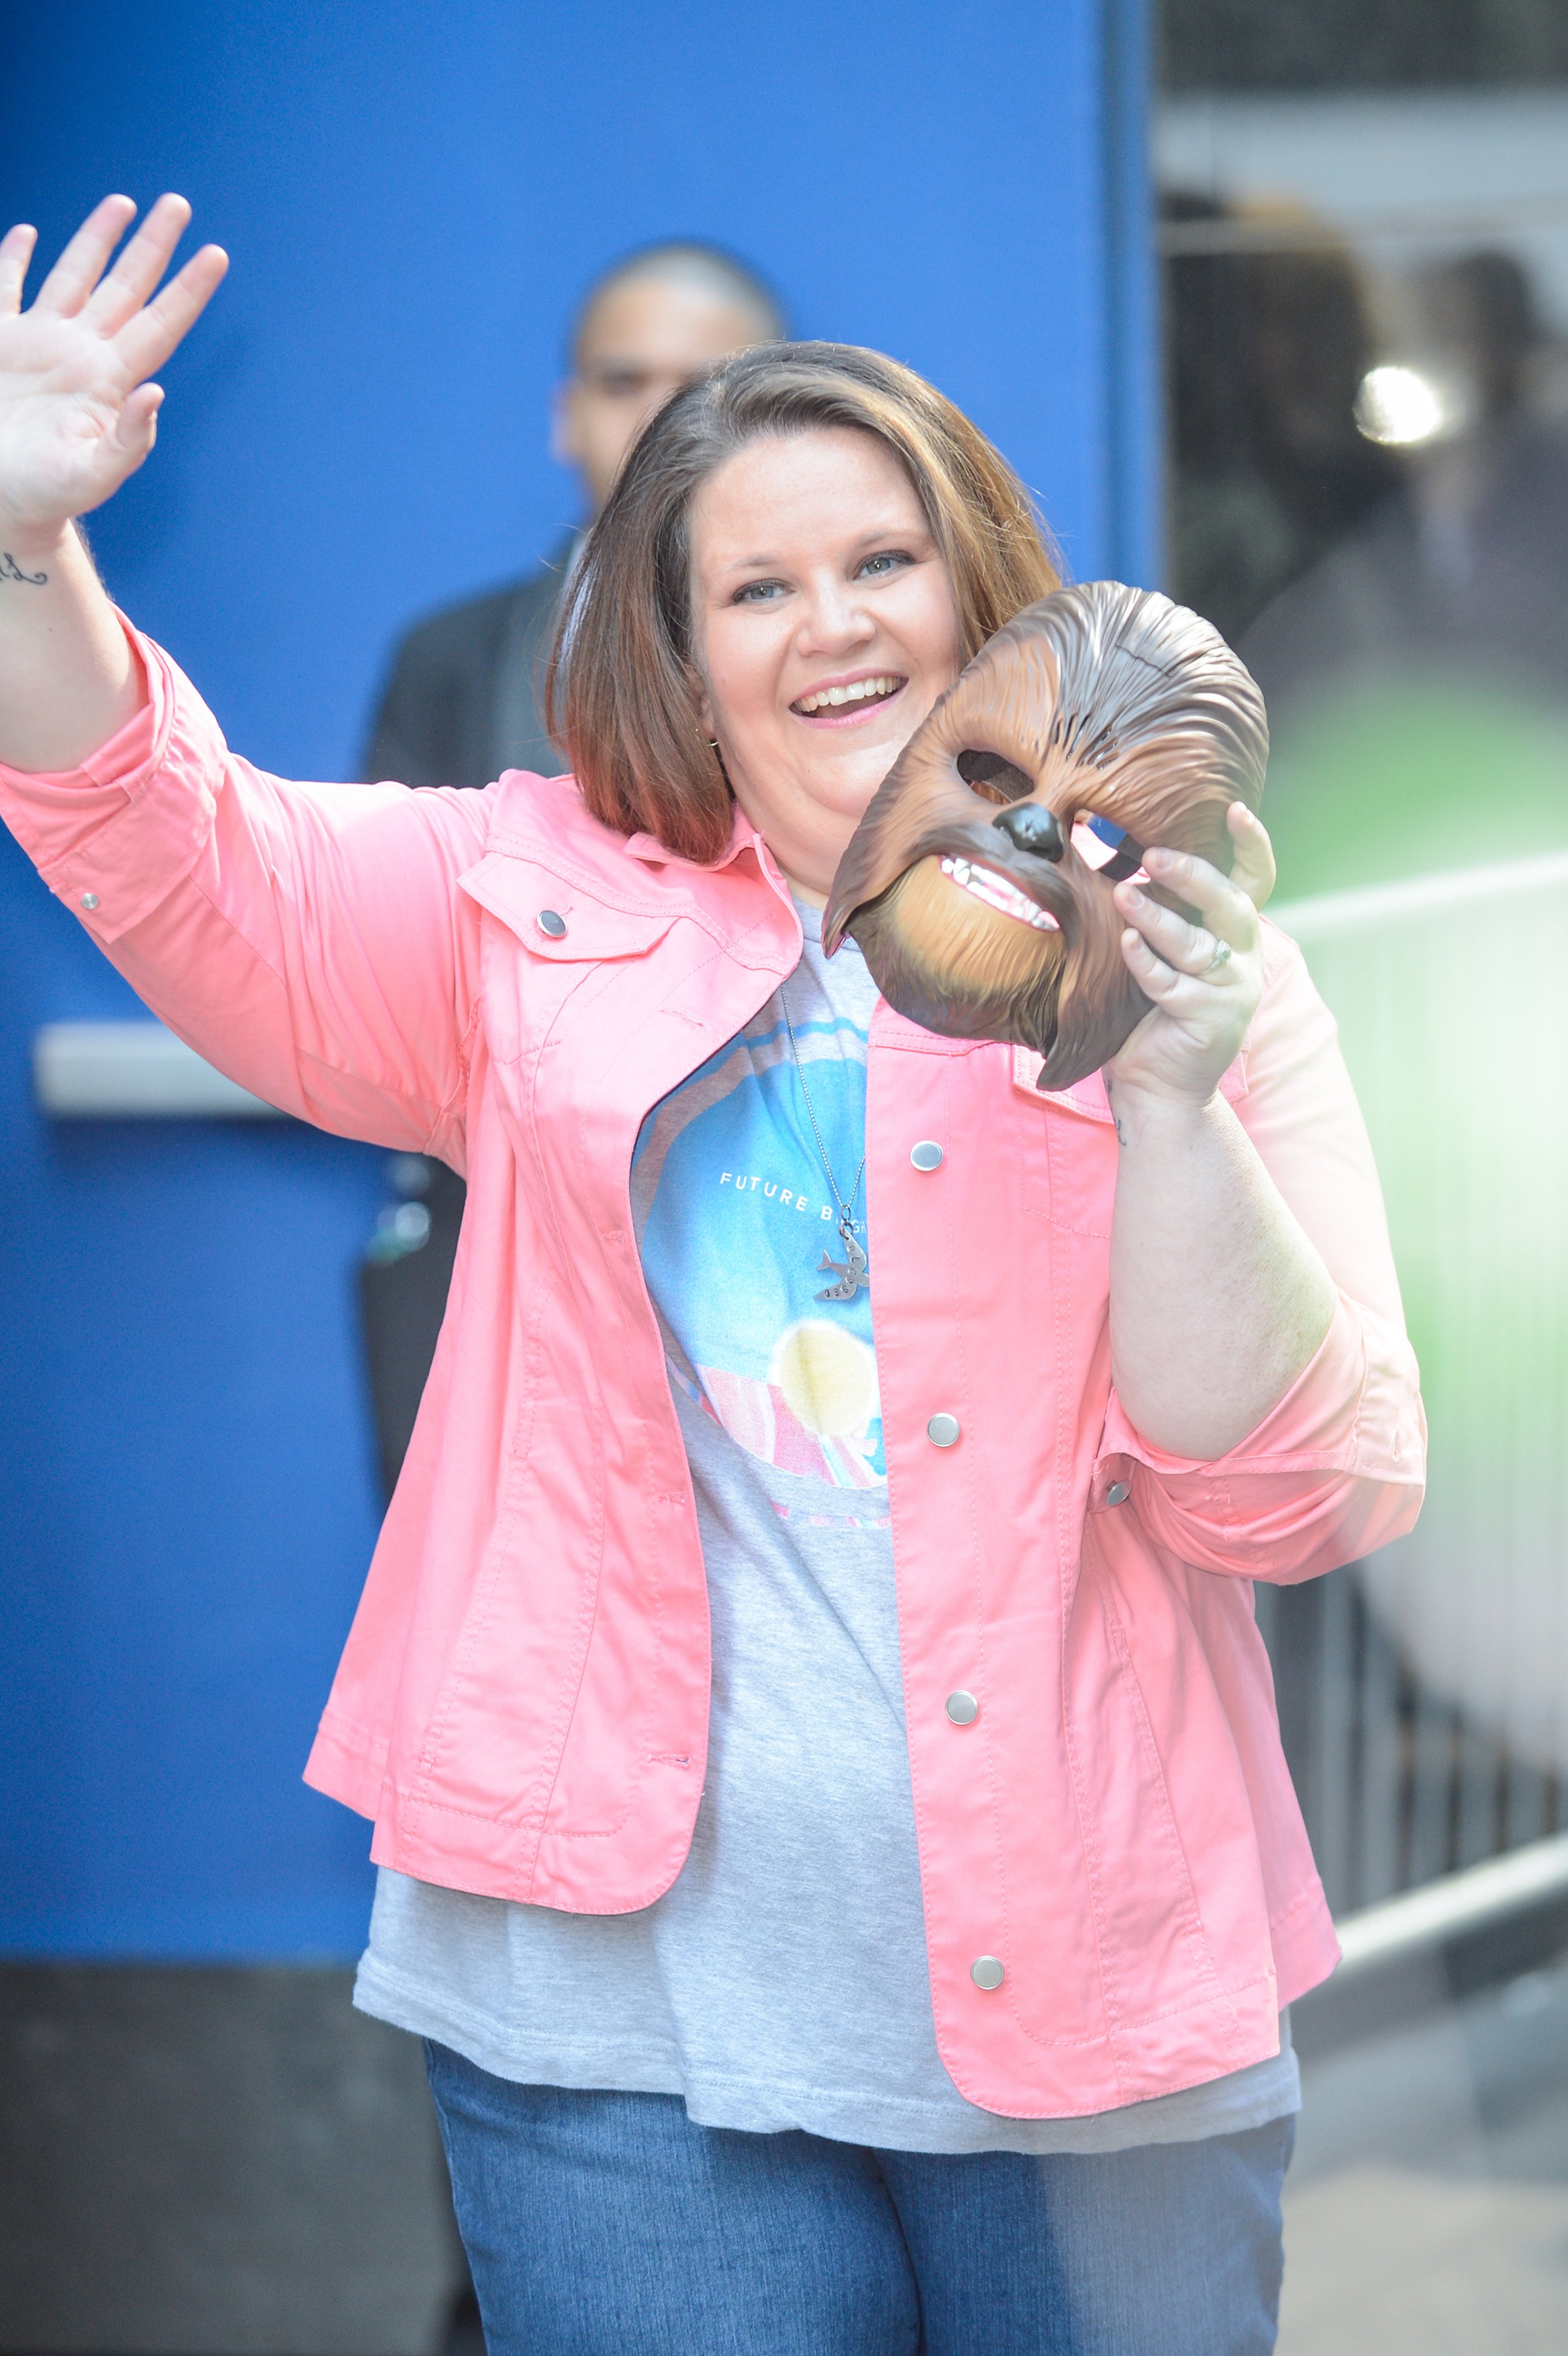 Candace Payne, "Chewbacca mom", leaves the "Good Morning America" taping at the ABC Times Square Studios in New York City on May 23, 2016.